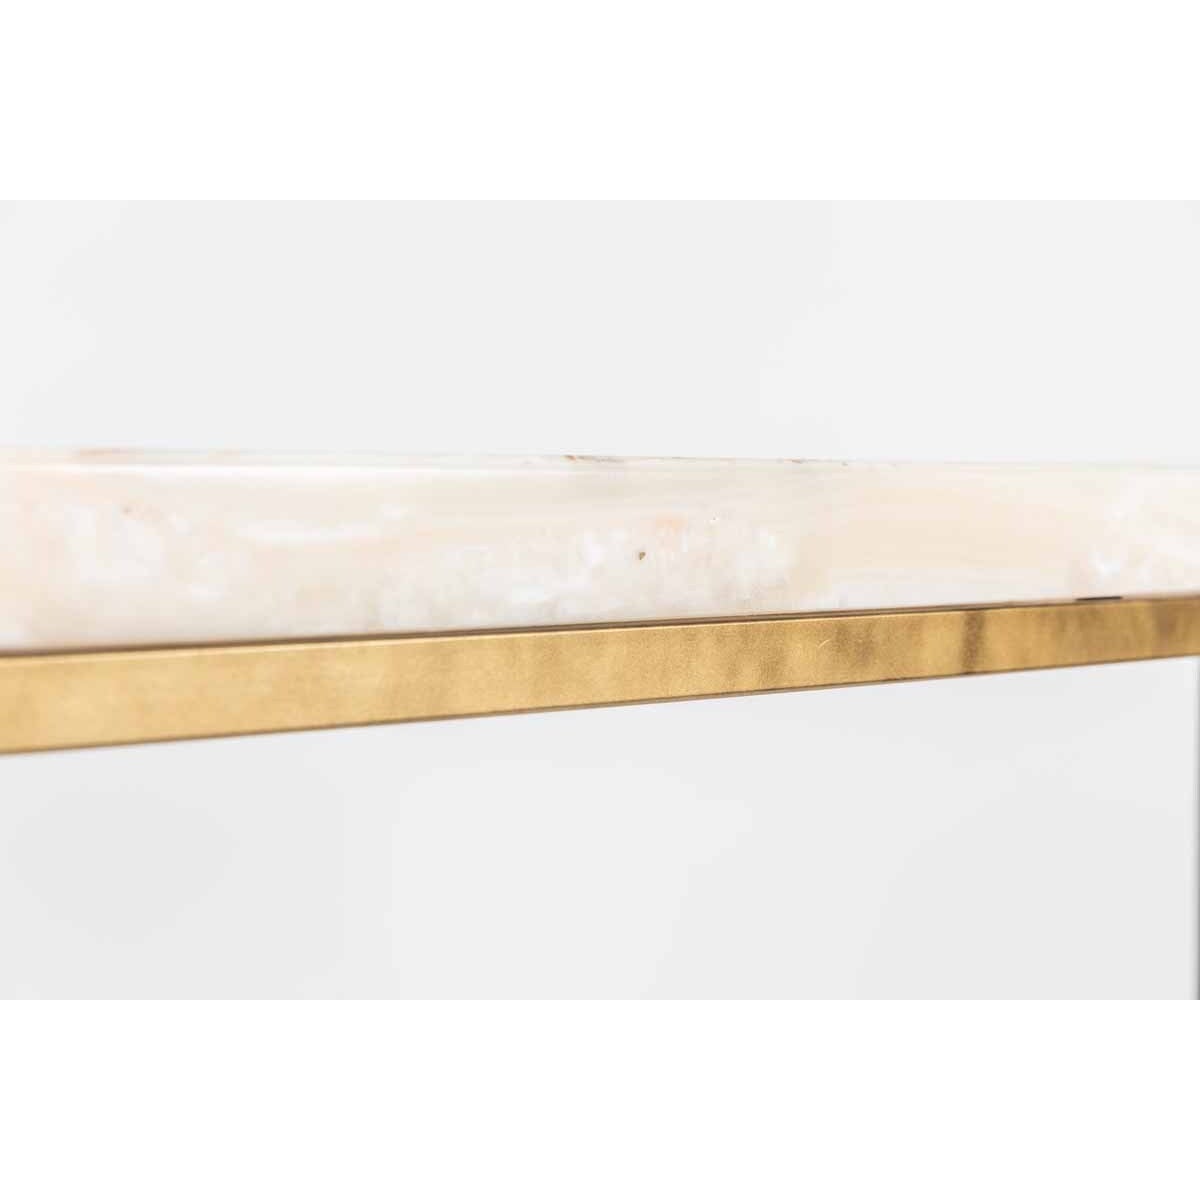 Oliver Small Console Table with Polished White Onyx Top & Base in Antique Gold